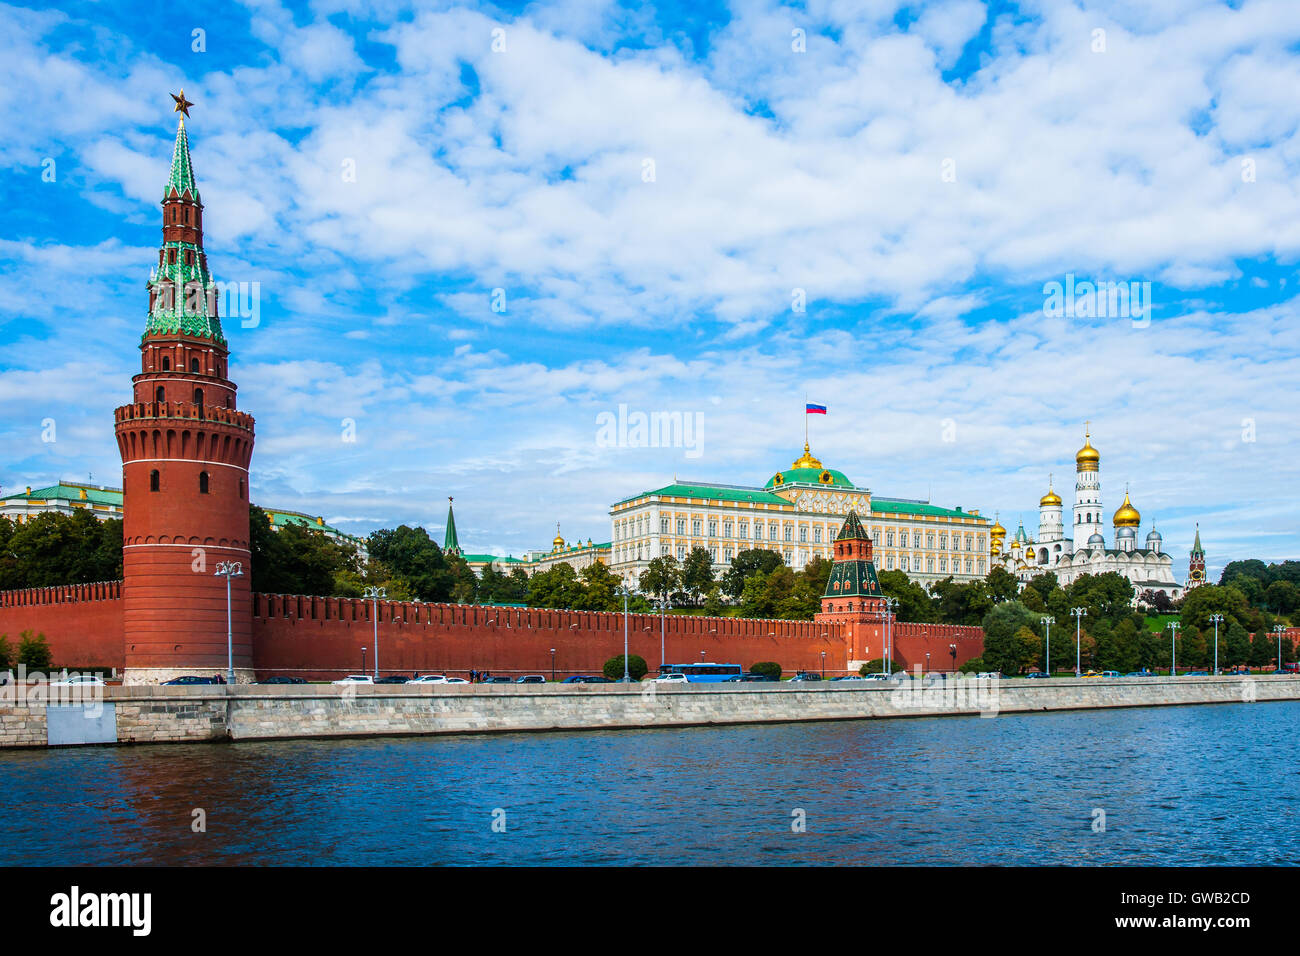 Moscow Kremlin and the Moscow river. Vodovzvodnaya (water pumping) tower of the Kremlin. Grand Kremlin Palace. Stock Photo